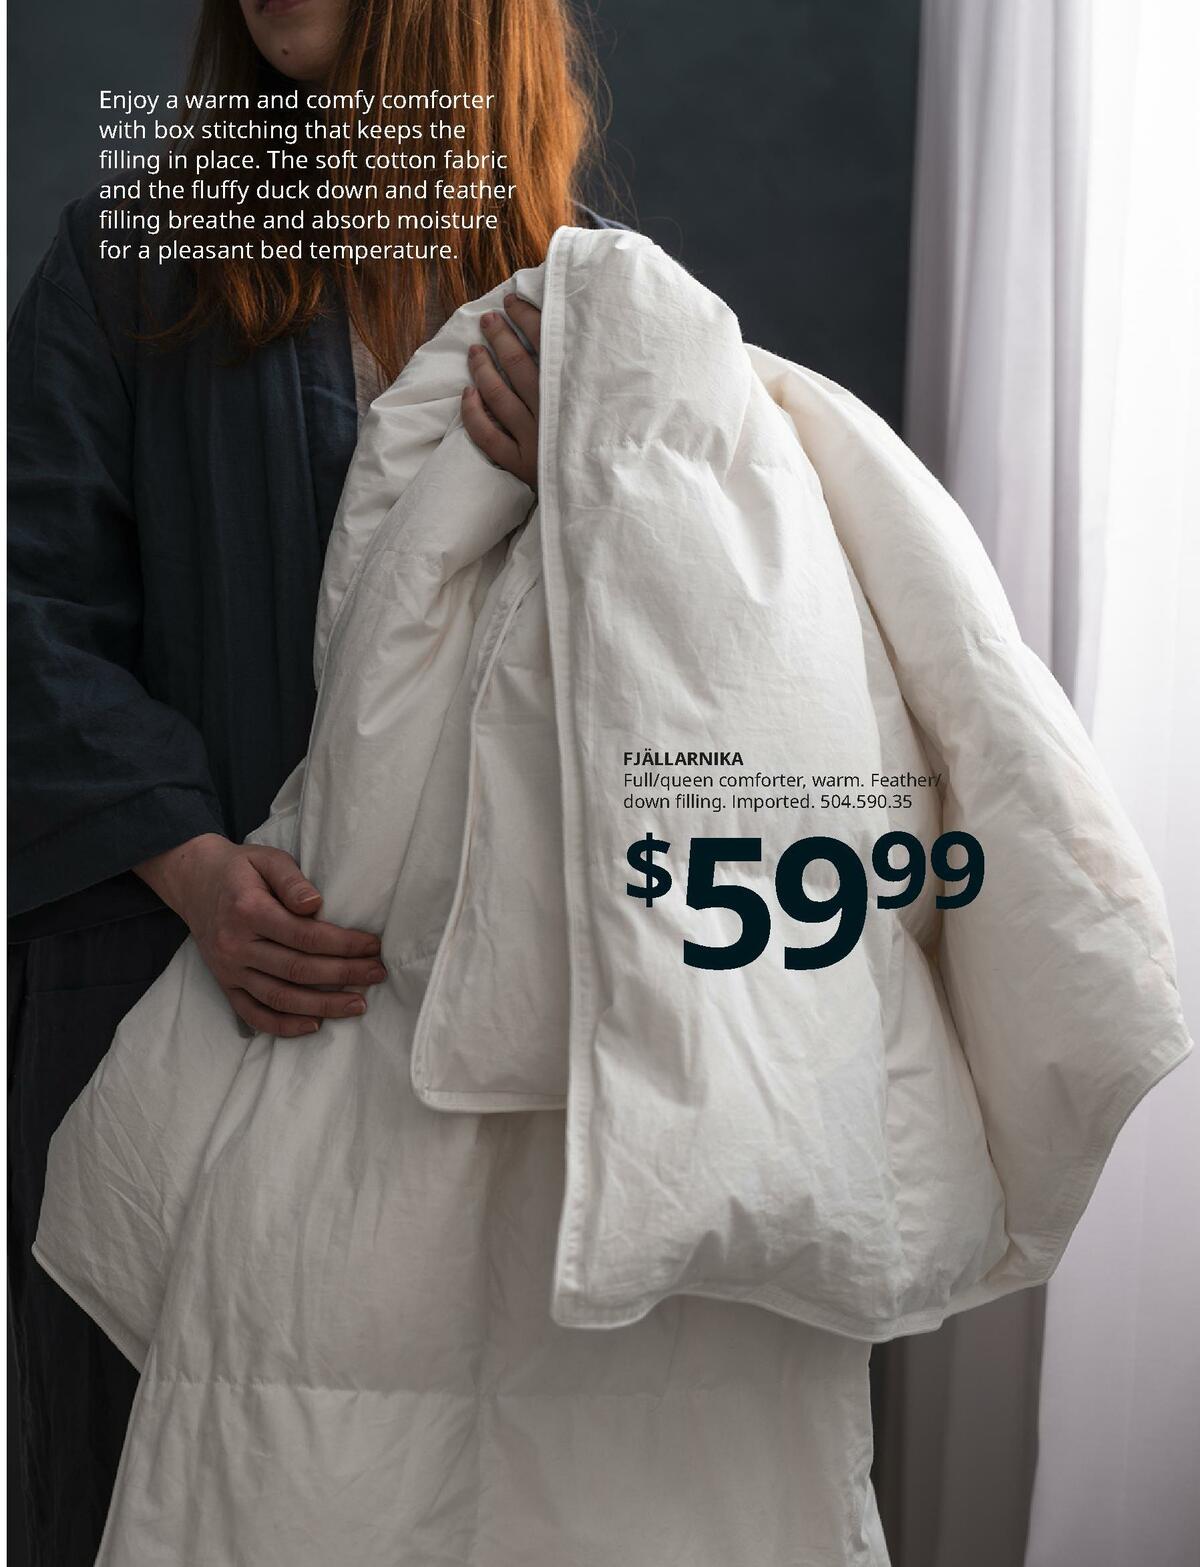 IKEA Bedrooms Brochure 2021 Weekly Ad from August 31